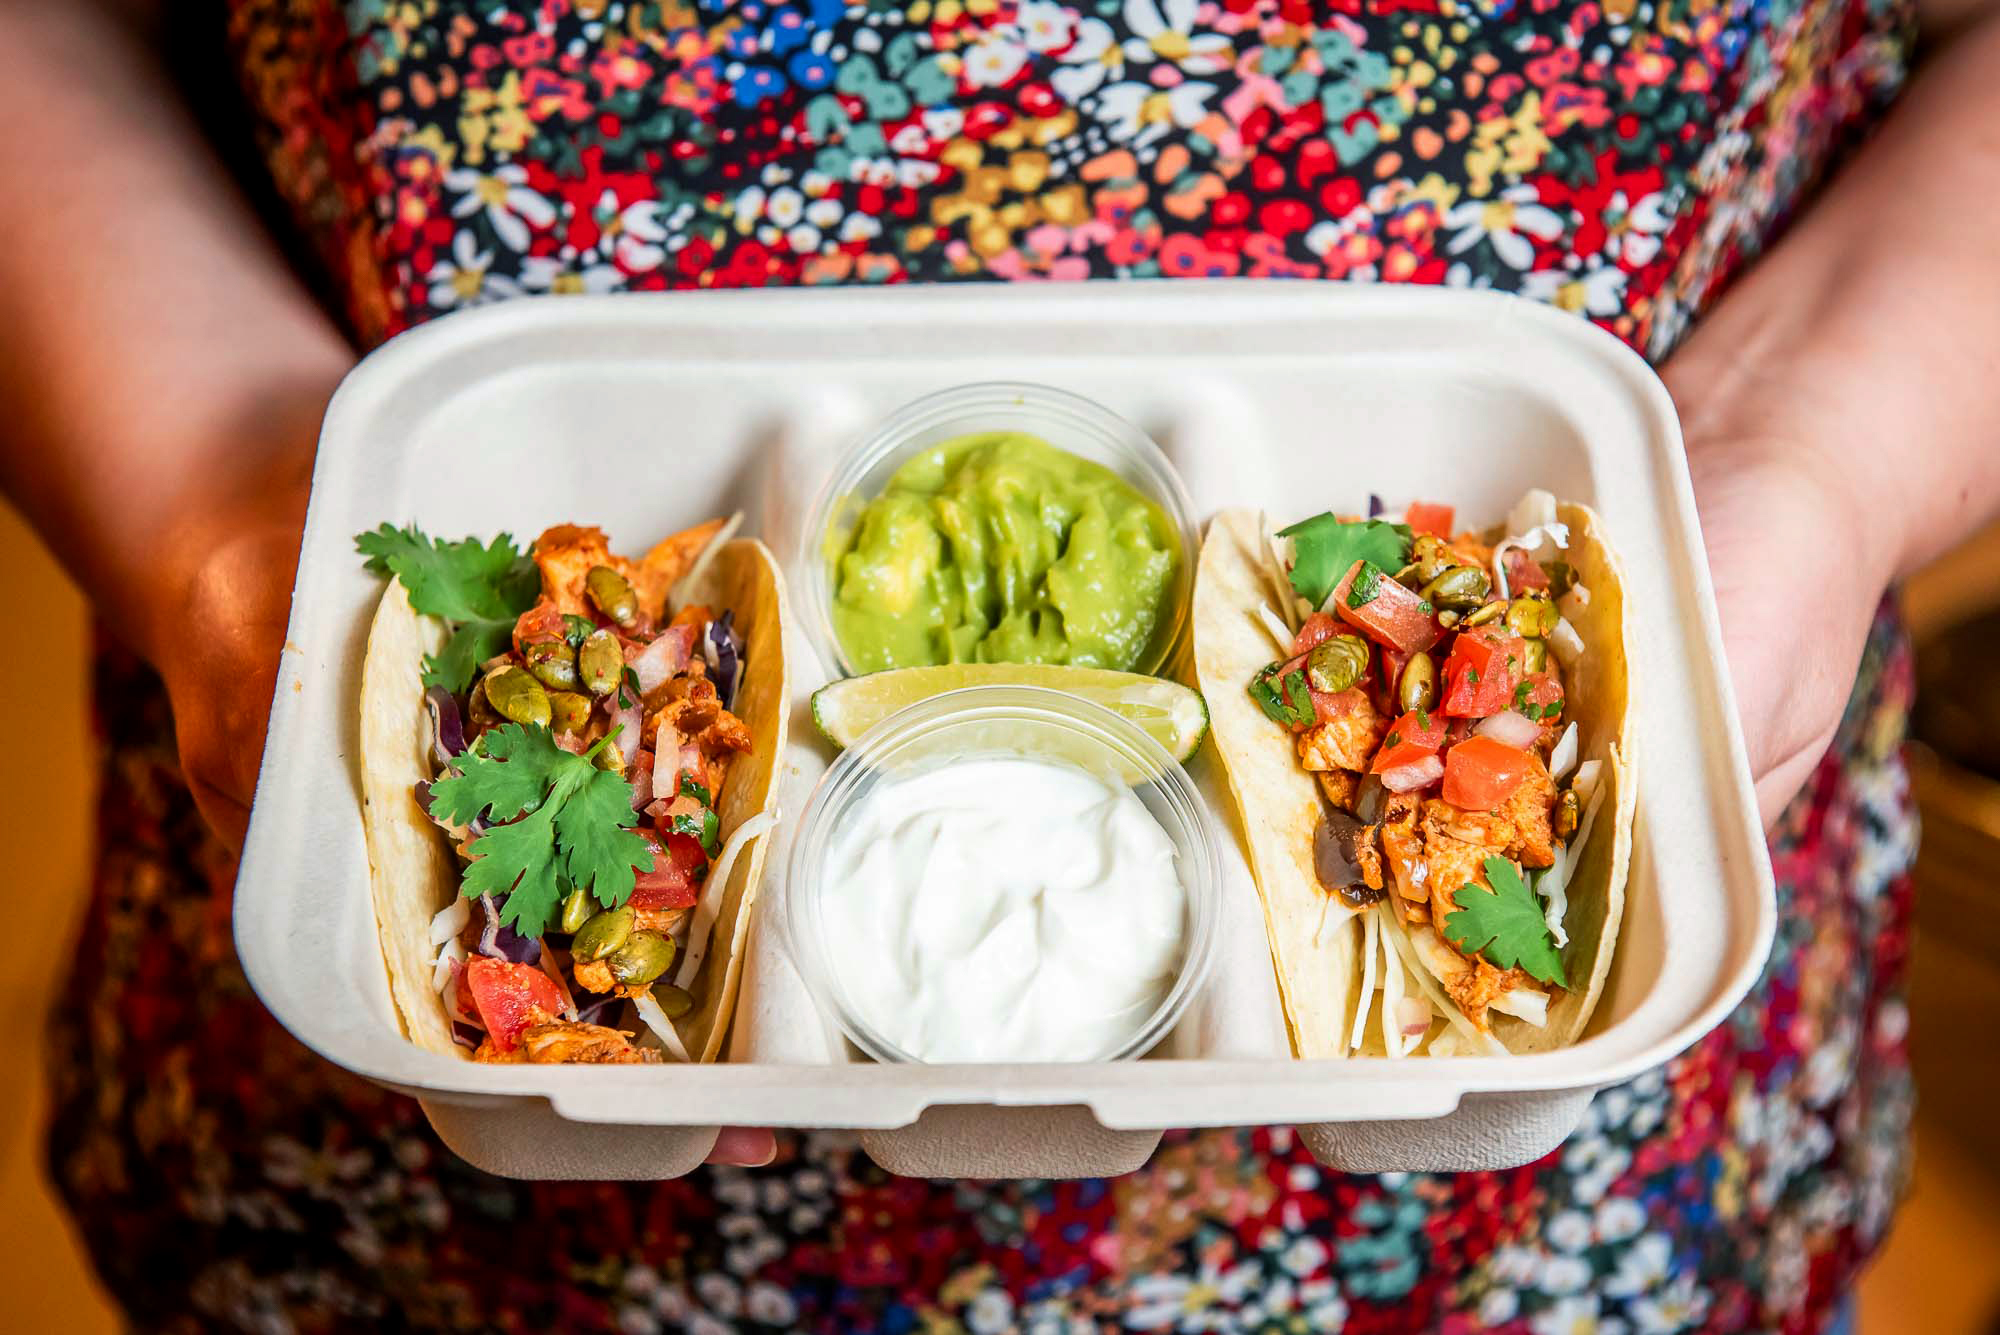 two hands hold box of tacos with gauc and sour cream